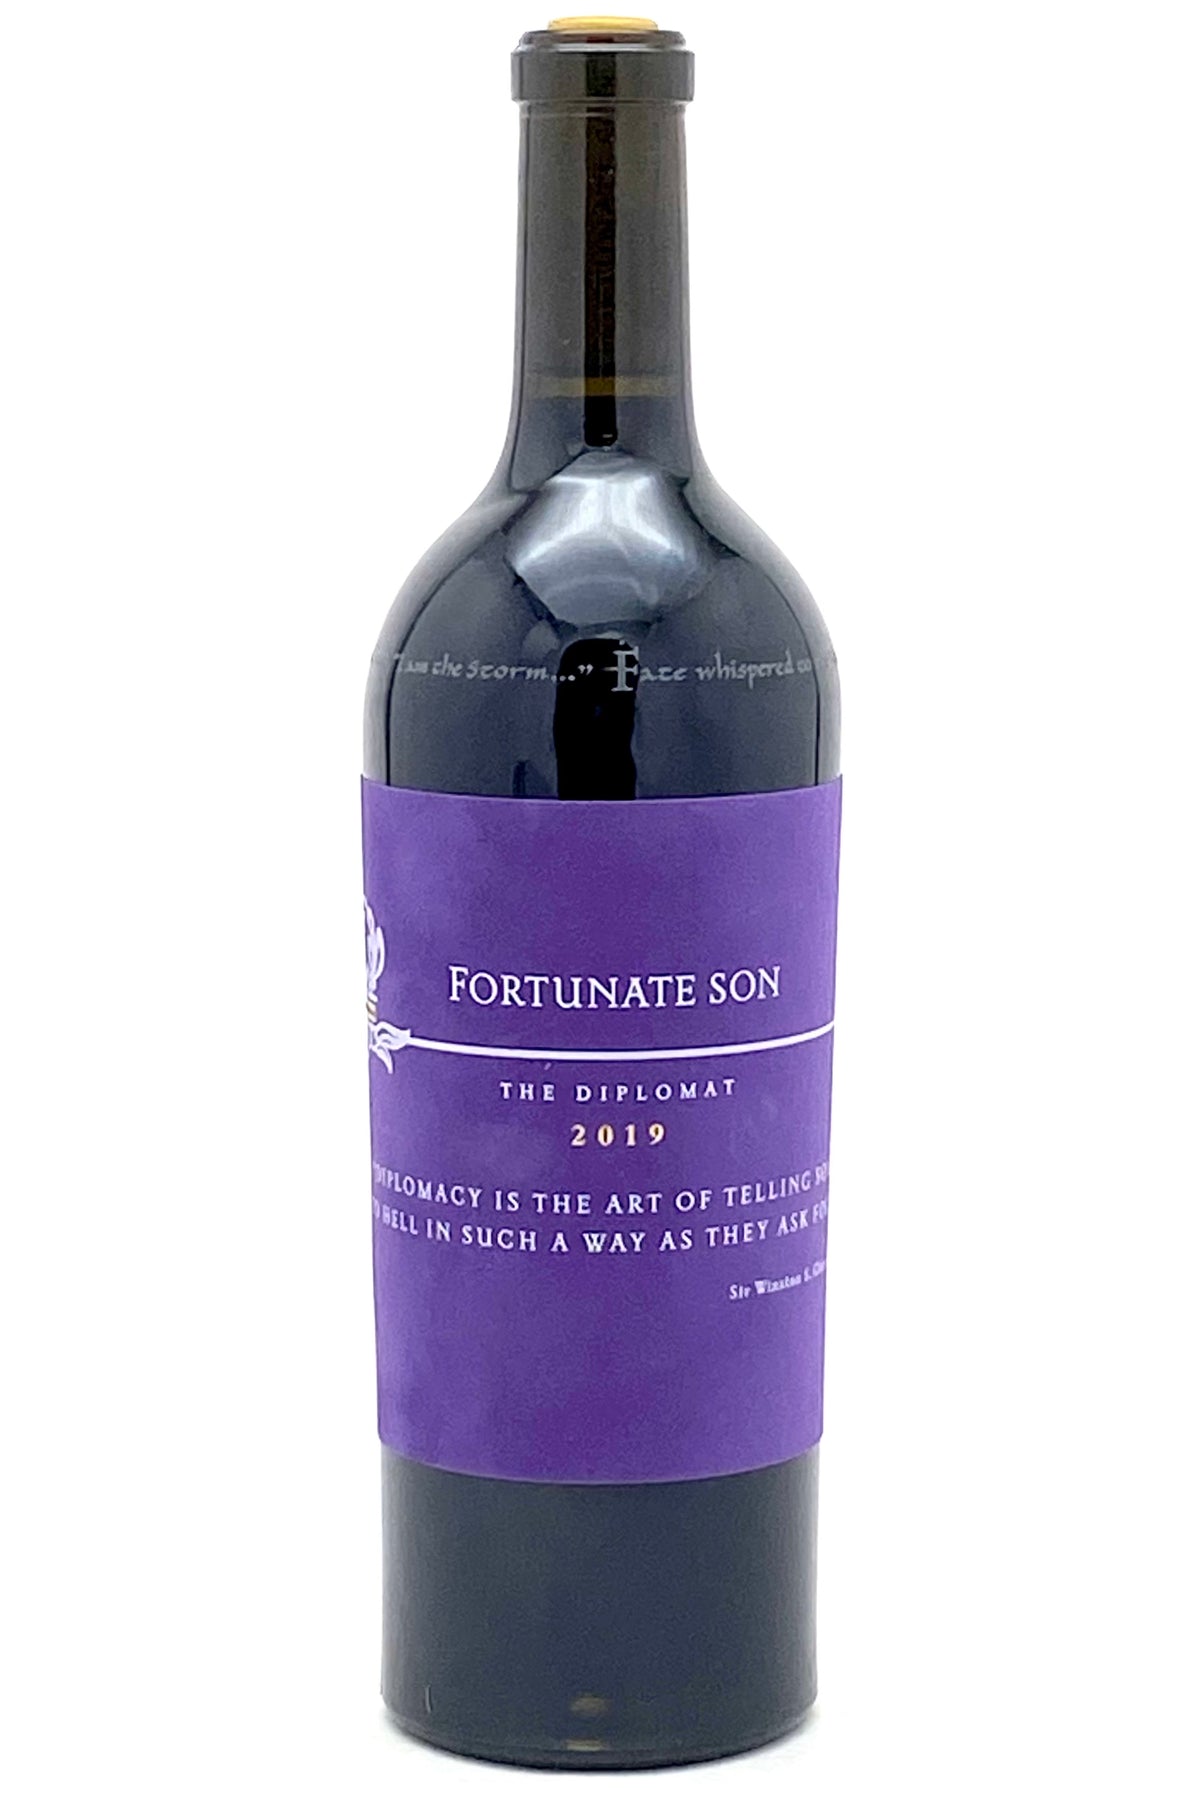 Fortunate Son 2019 The Diplomat Red Blend Napa Valley by Hundred Acre